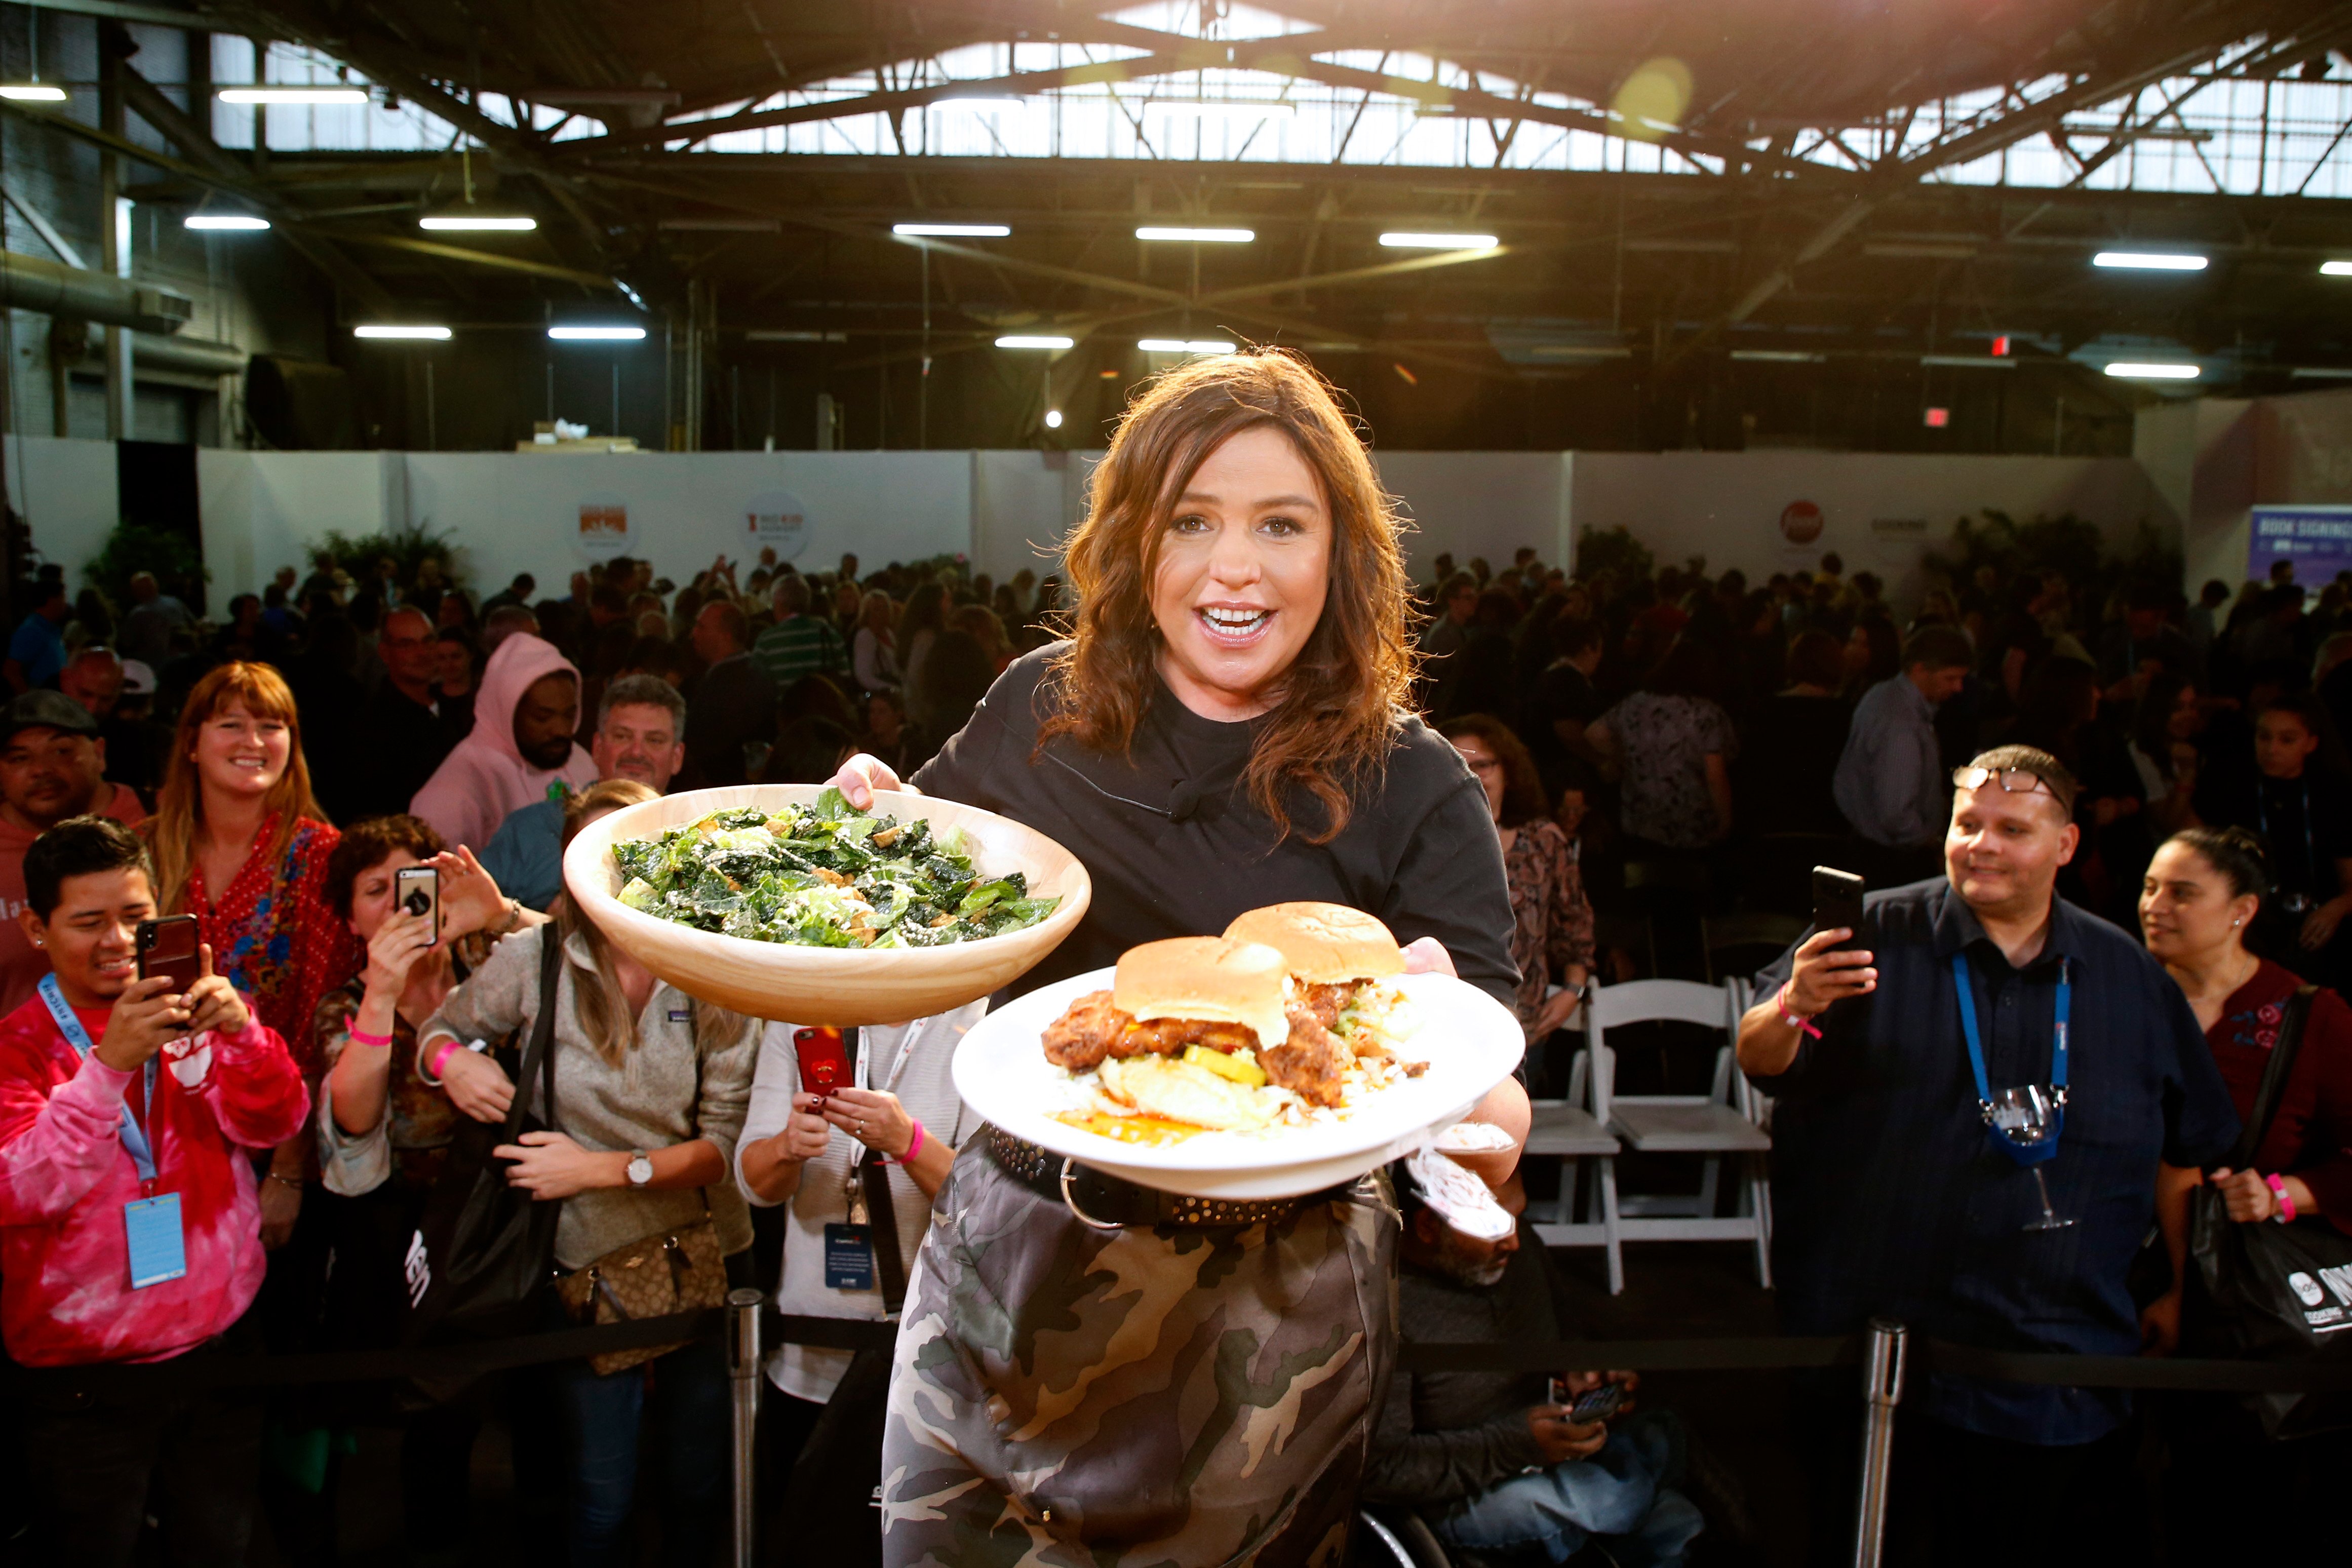 Rachael Ray holds a plate of food in each hand in this 2019 photo.